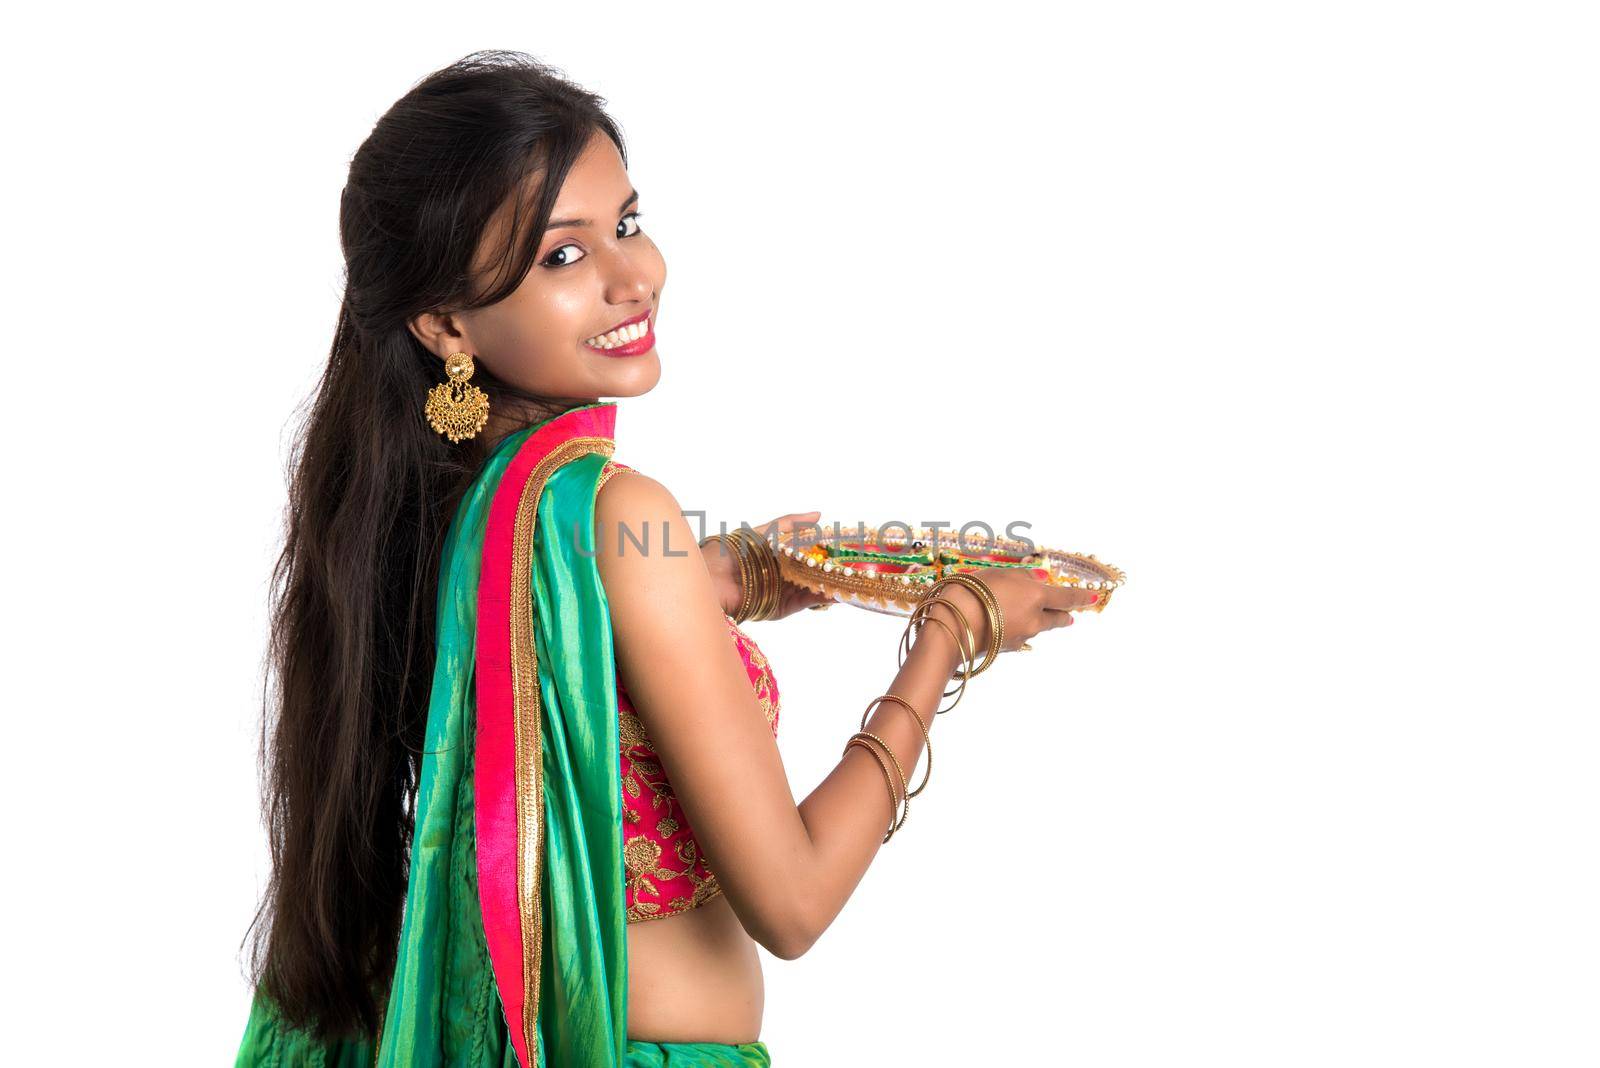 Portrait of a Indian Traditional Girl holding Diya, Girl Celebrating Diwali or Deepavali with holding oil lamp during festival of light on white background